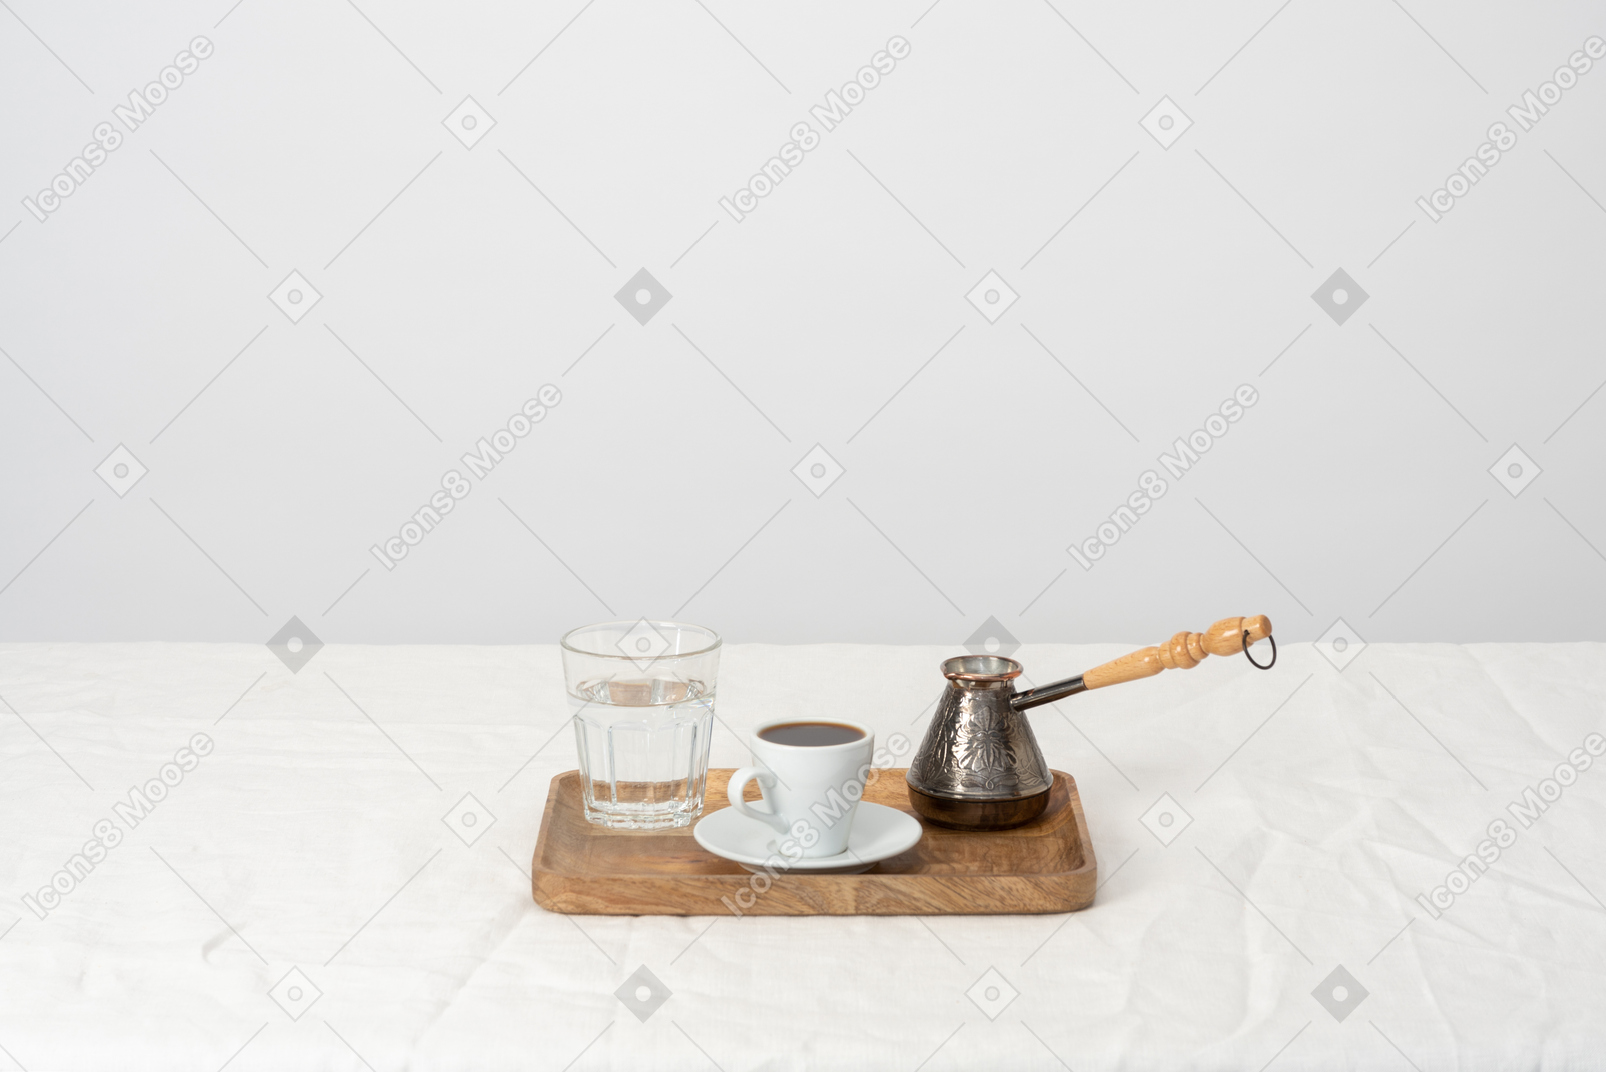 Cezve, glass of water and cup of coffeeon the wooden tray